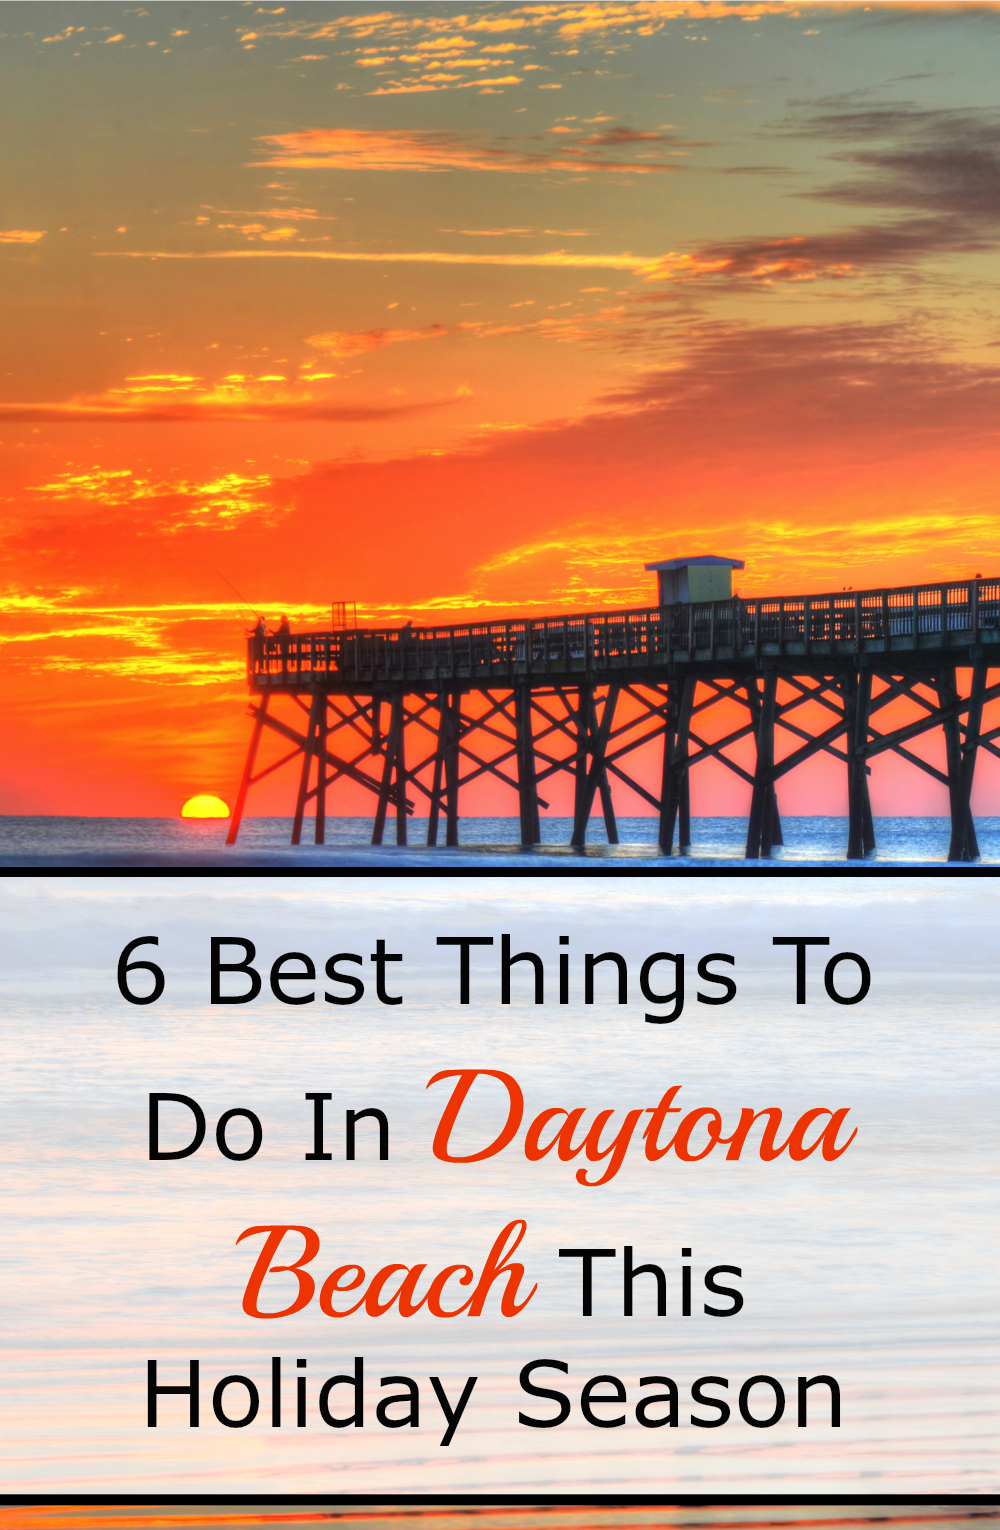 6 Best Things To Do In Daytona Beach This Holiday Season. From exciting to relaxing, Daytona Beach has so many great things to do for everyone. Couples, families, and singles have plenty of options to choose from to get a well-needed break from the daily grind. I know we all need that from time to time! #WeekdayGetaways @daytonabeachfun @discoverdaytonabeach